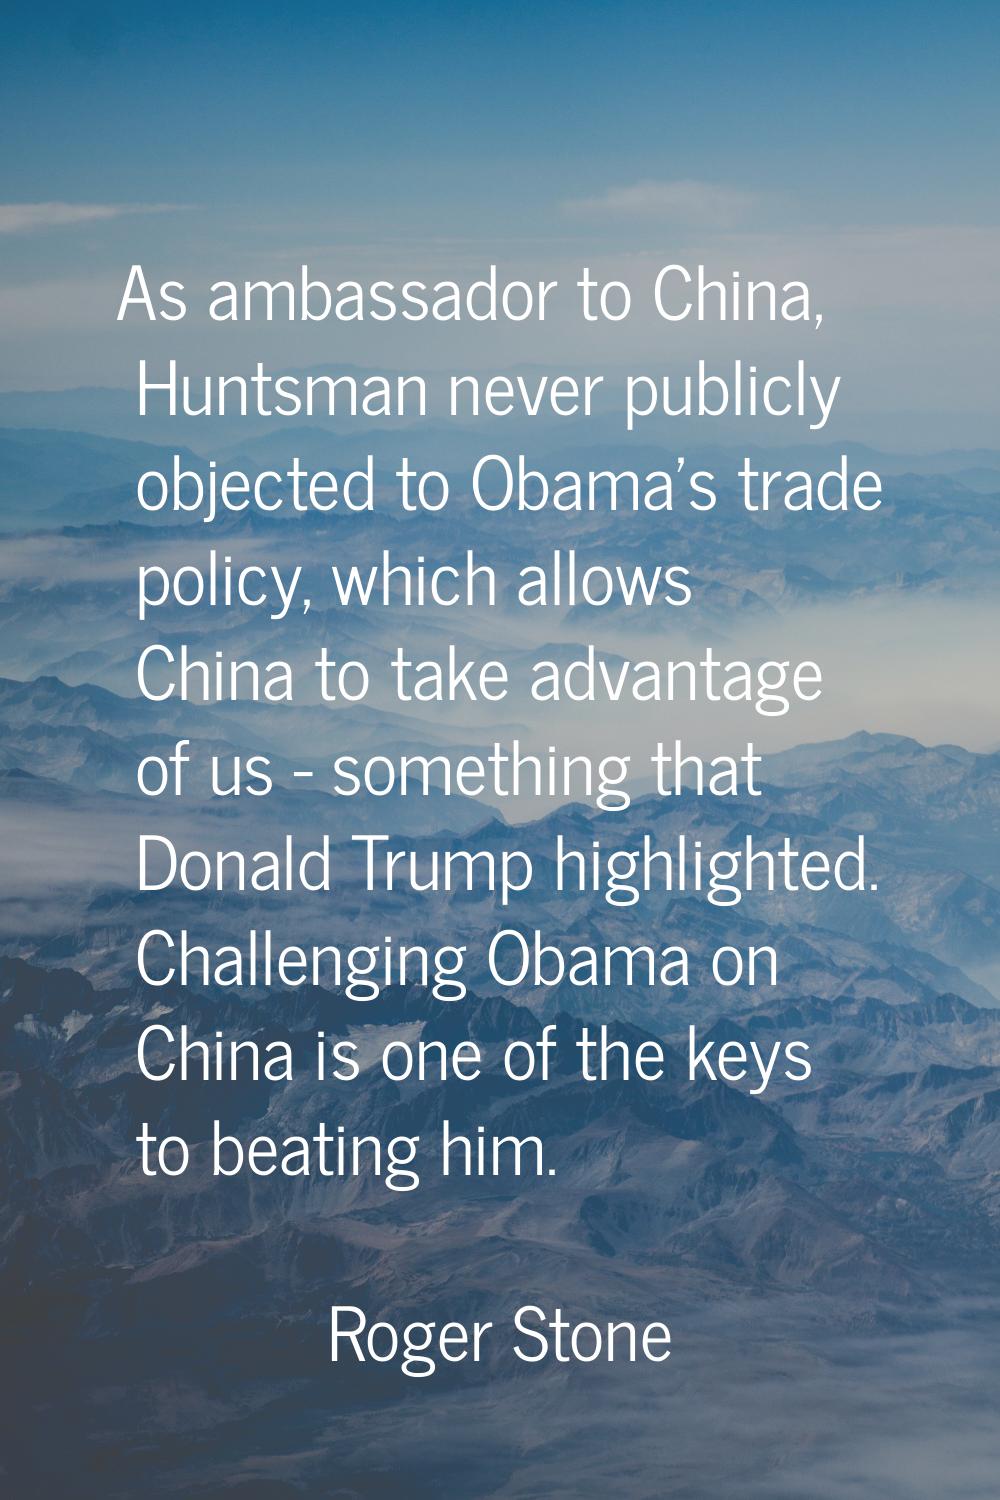 As ambassador to China, Huntsman never publicly objected to Obama's trade policy, which allows Chin